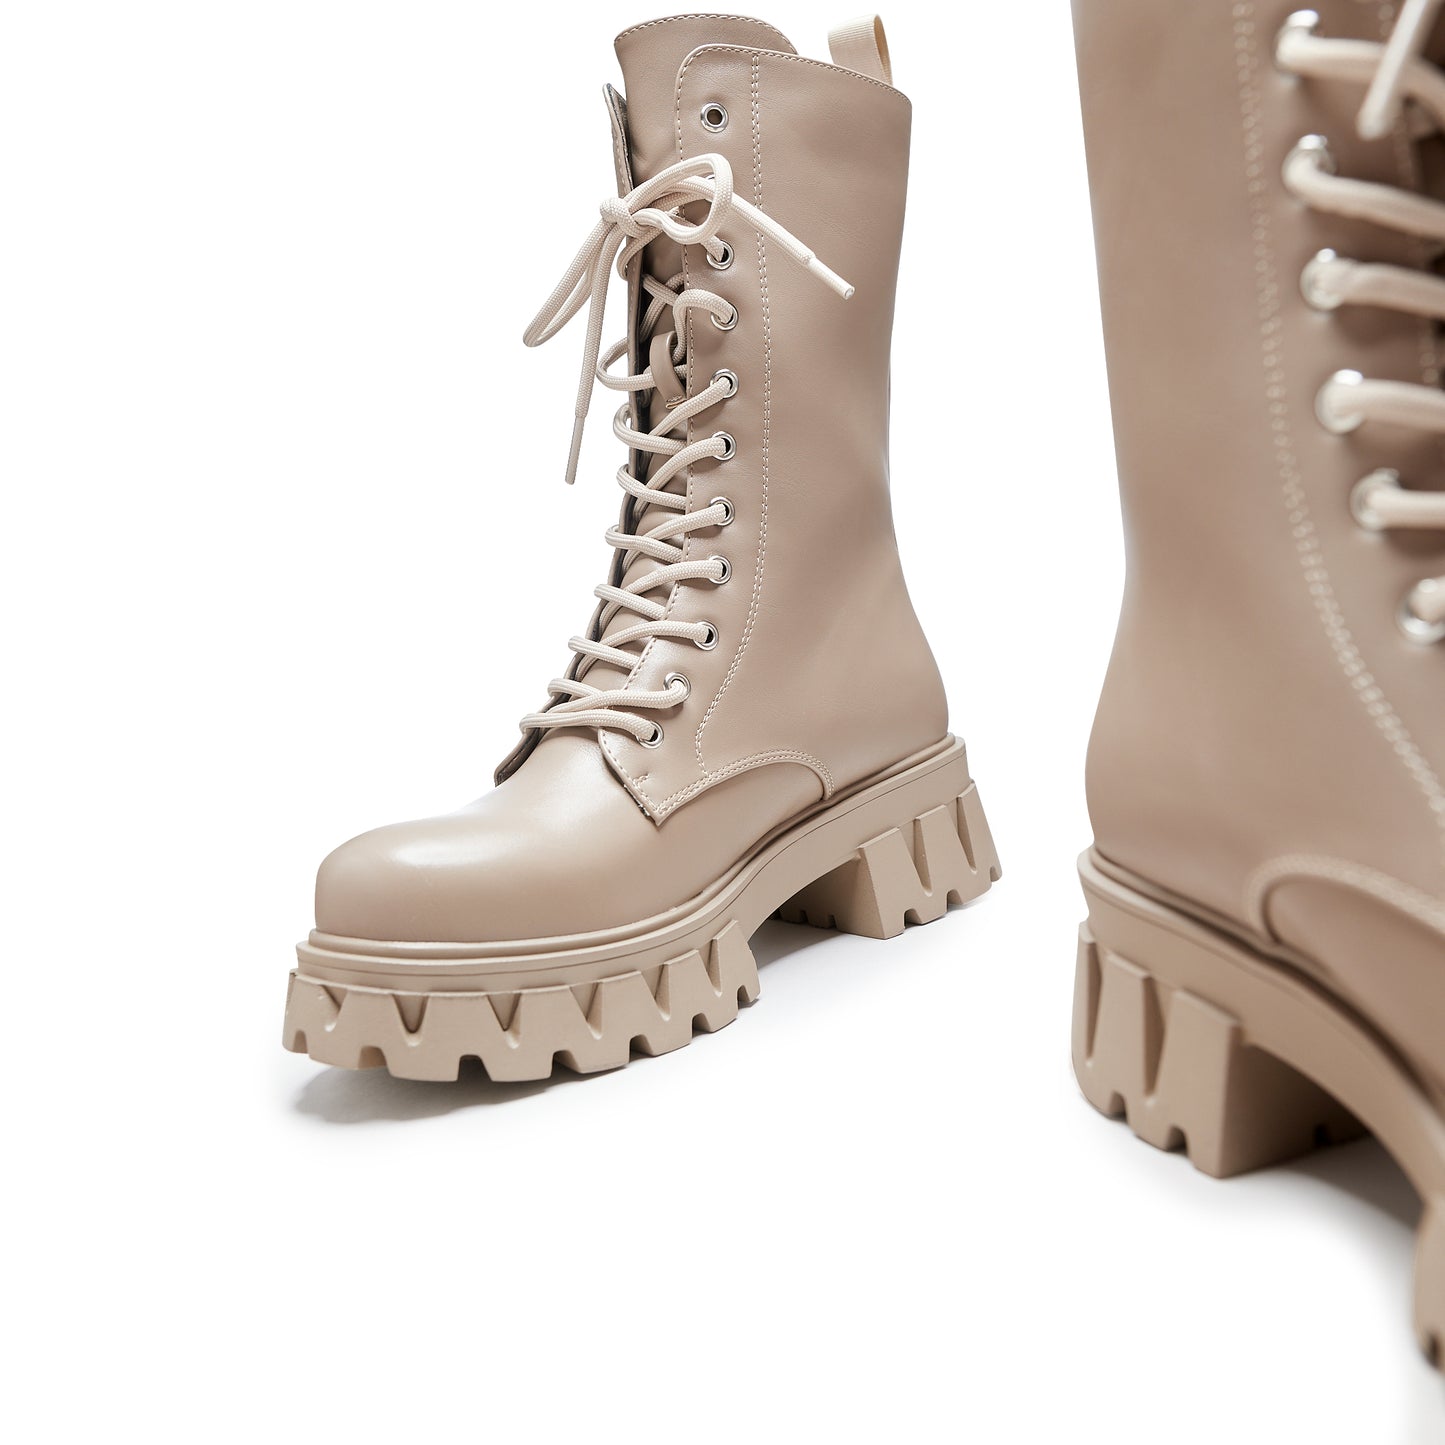 Siren Tall Lace Up Boots - Dust - Ankle Boots - KOI Footwear - Beige - Front Detail